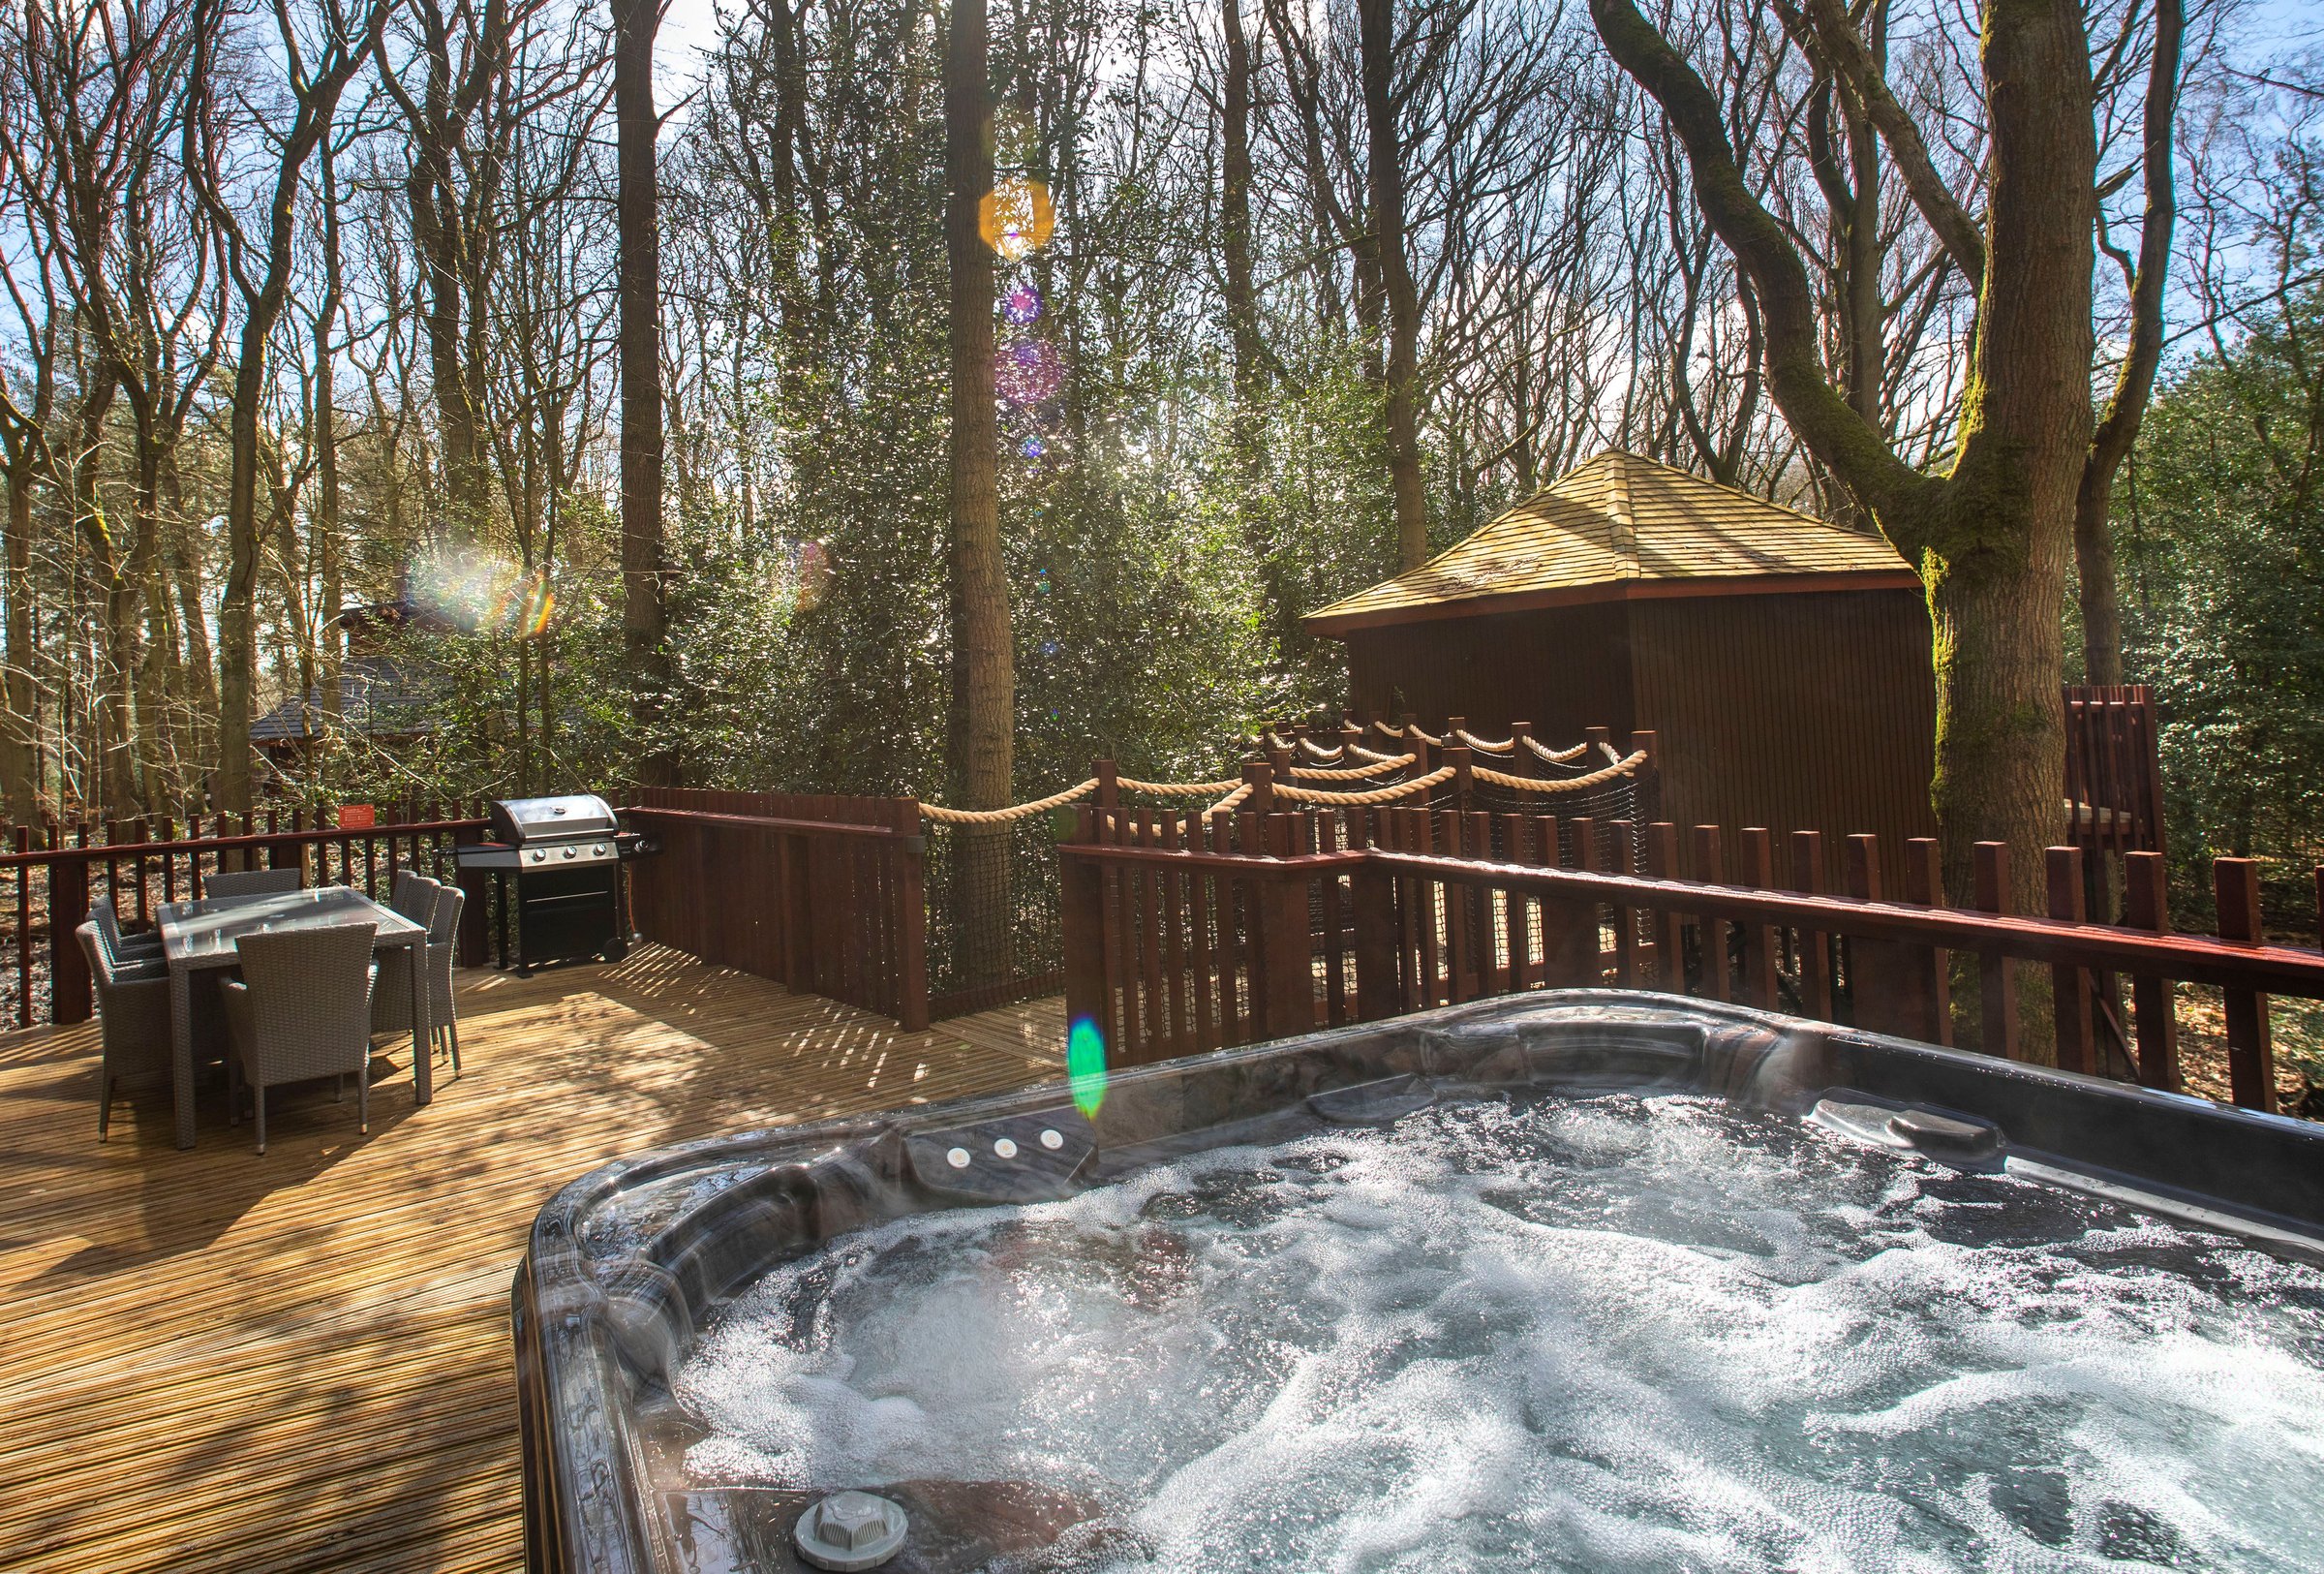 Golden Oak Treehouse at Delamere Forest, Cheshire